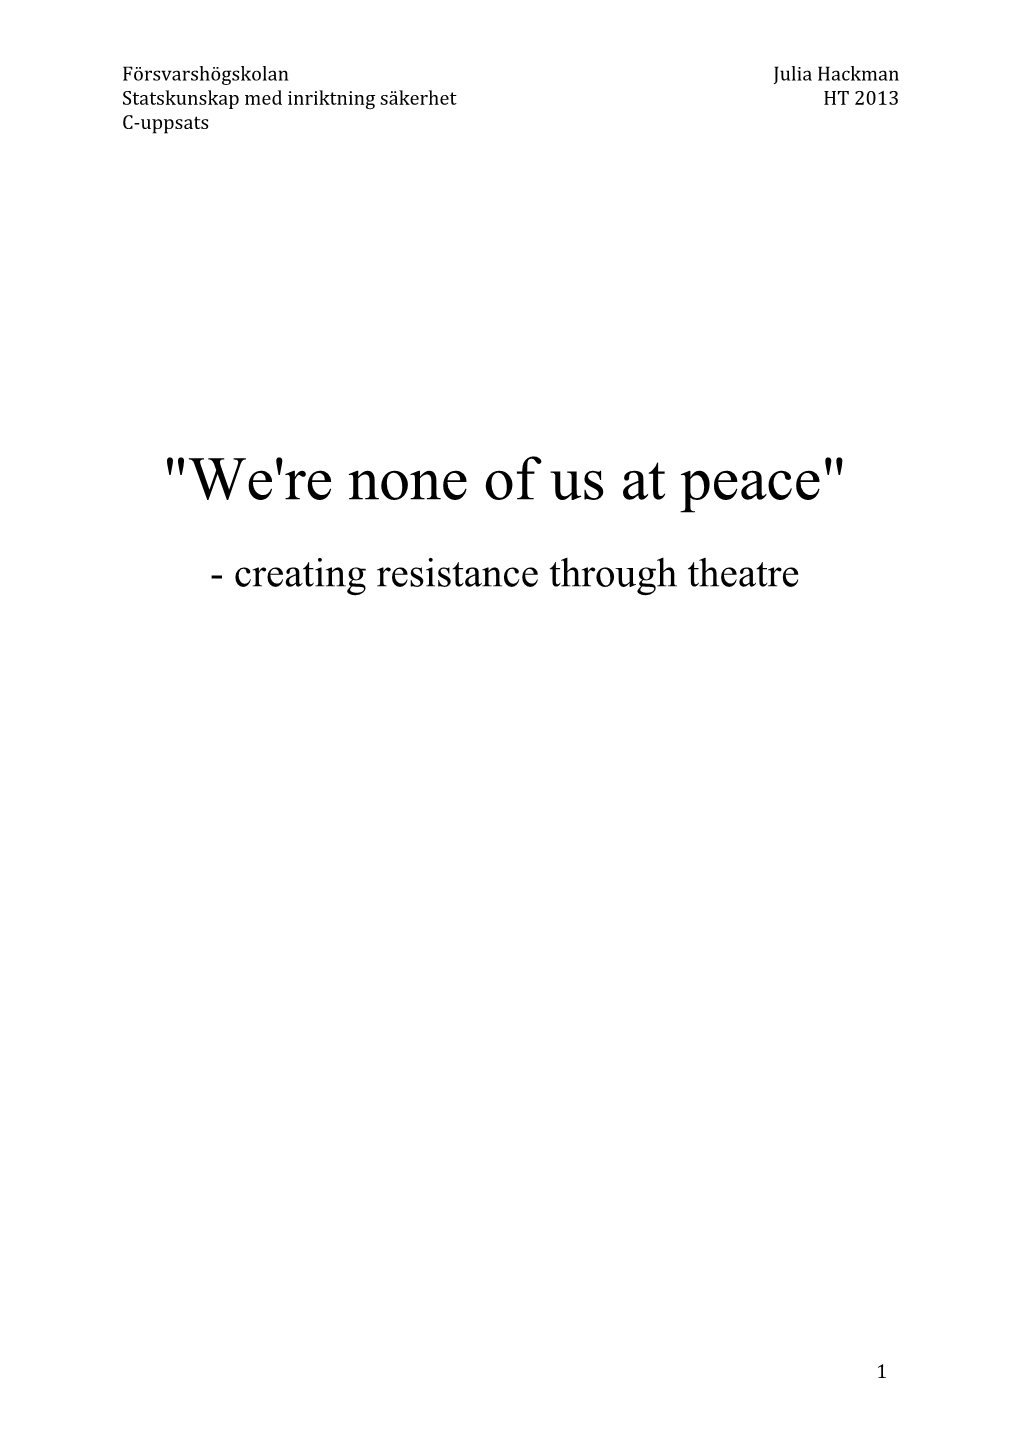 "We're None of Us at Peace"